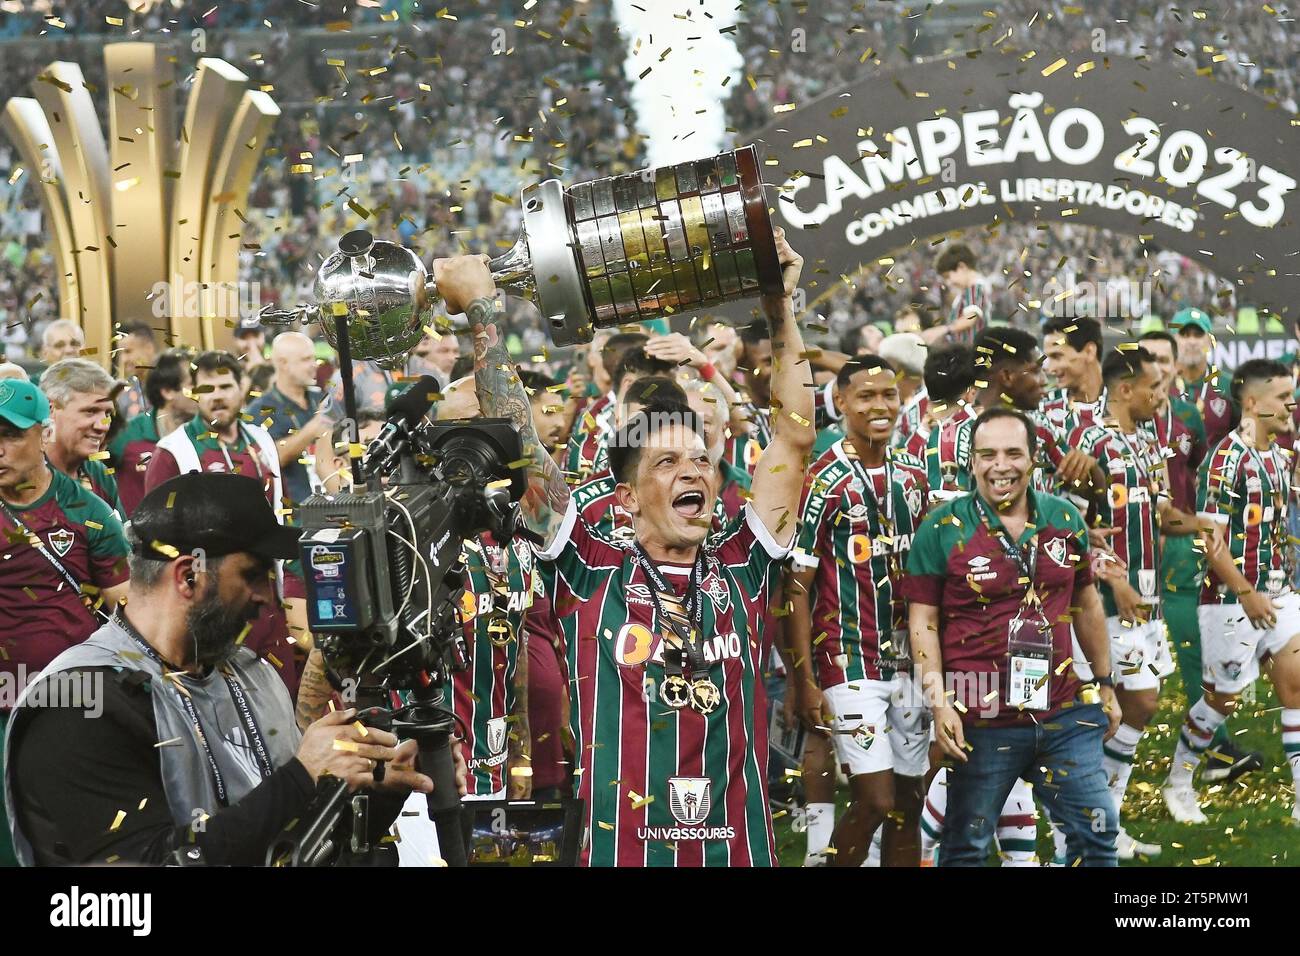 Rio de Janeiro, Brazil, November 4, 2023. Soccer players from the Fluminense team raise the trophy and celebrate winning the 2023 Copa Libertadores at Stock Photo